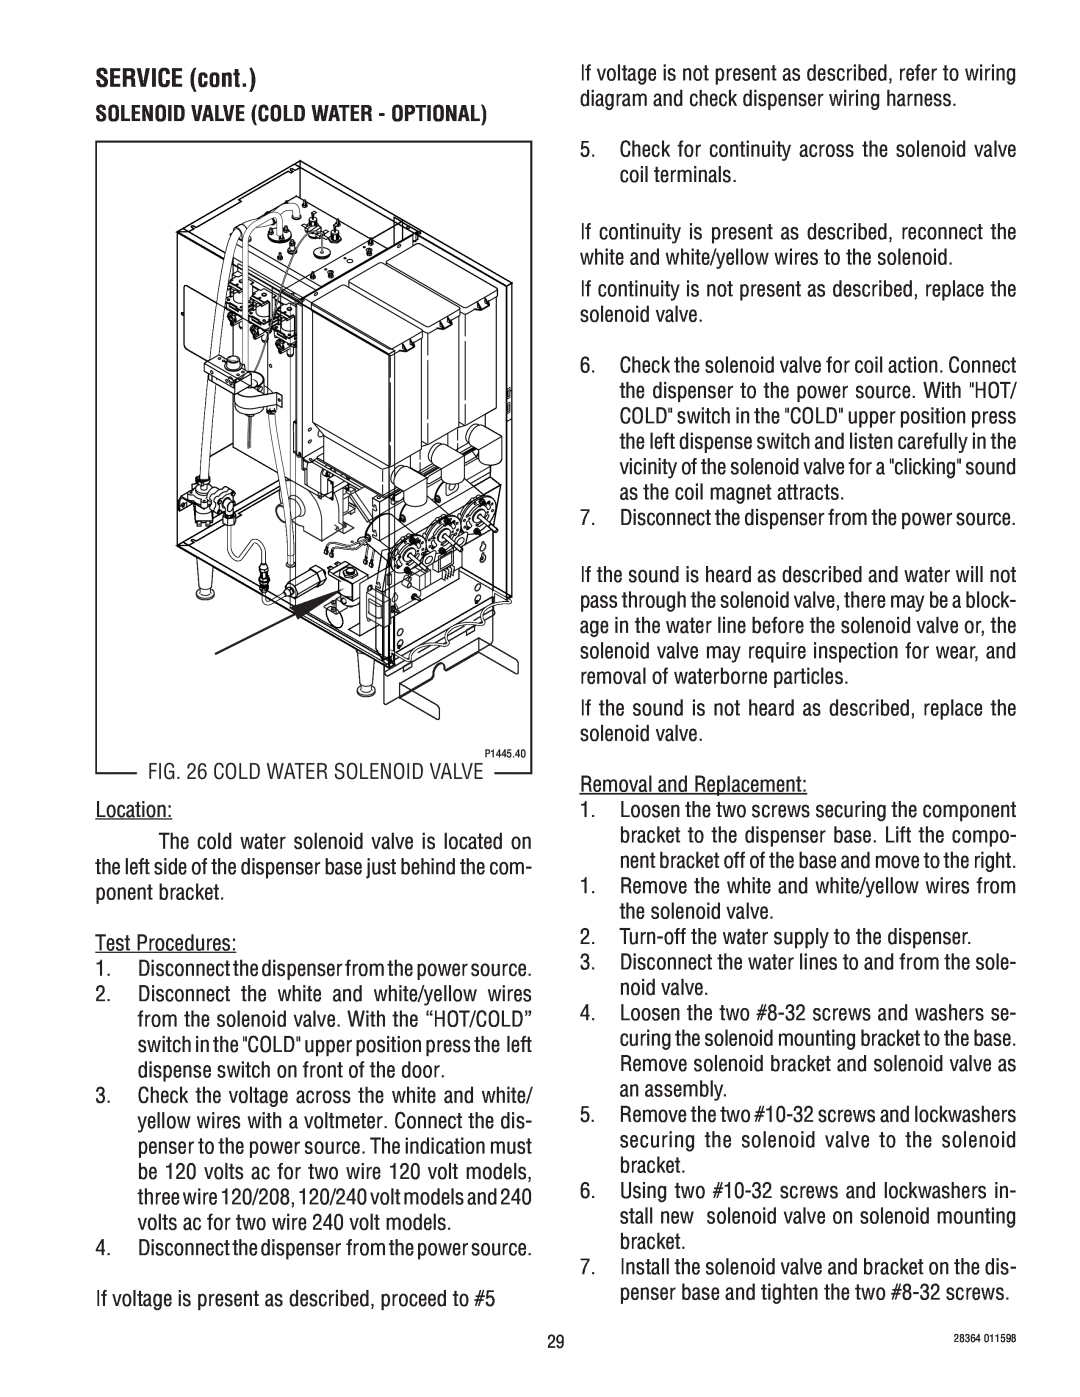 Bunn FMD-3 service manual Solenoid Valve Cold Water - Optional, SERVICE cont 